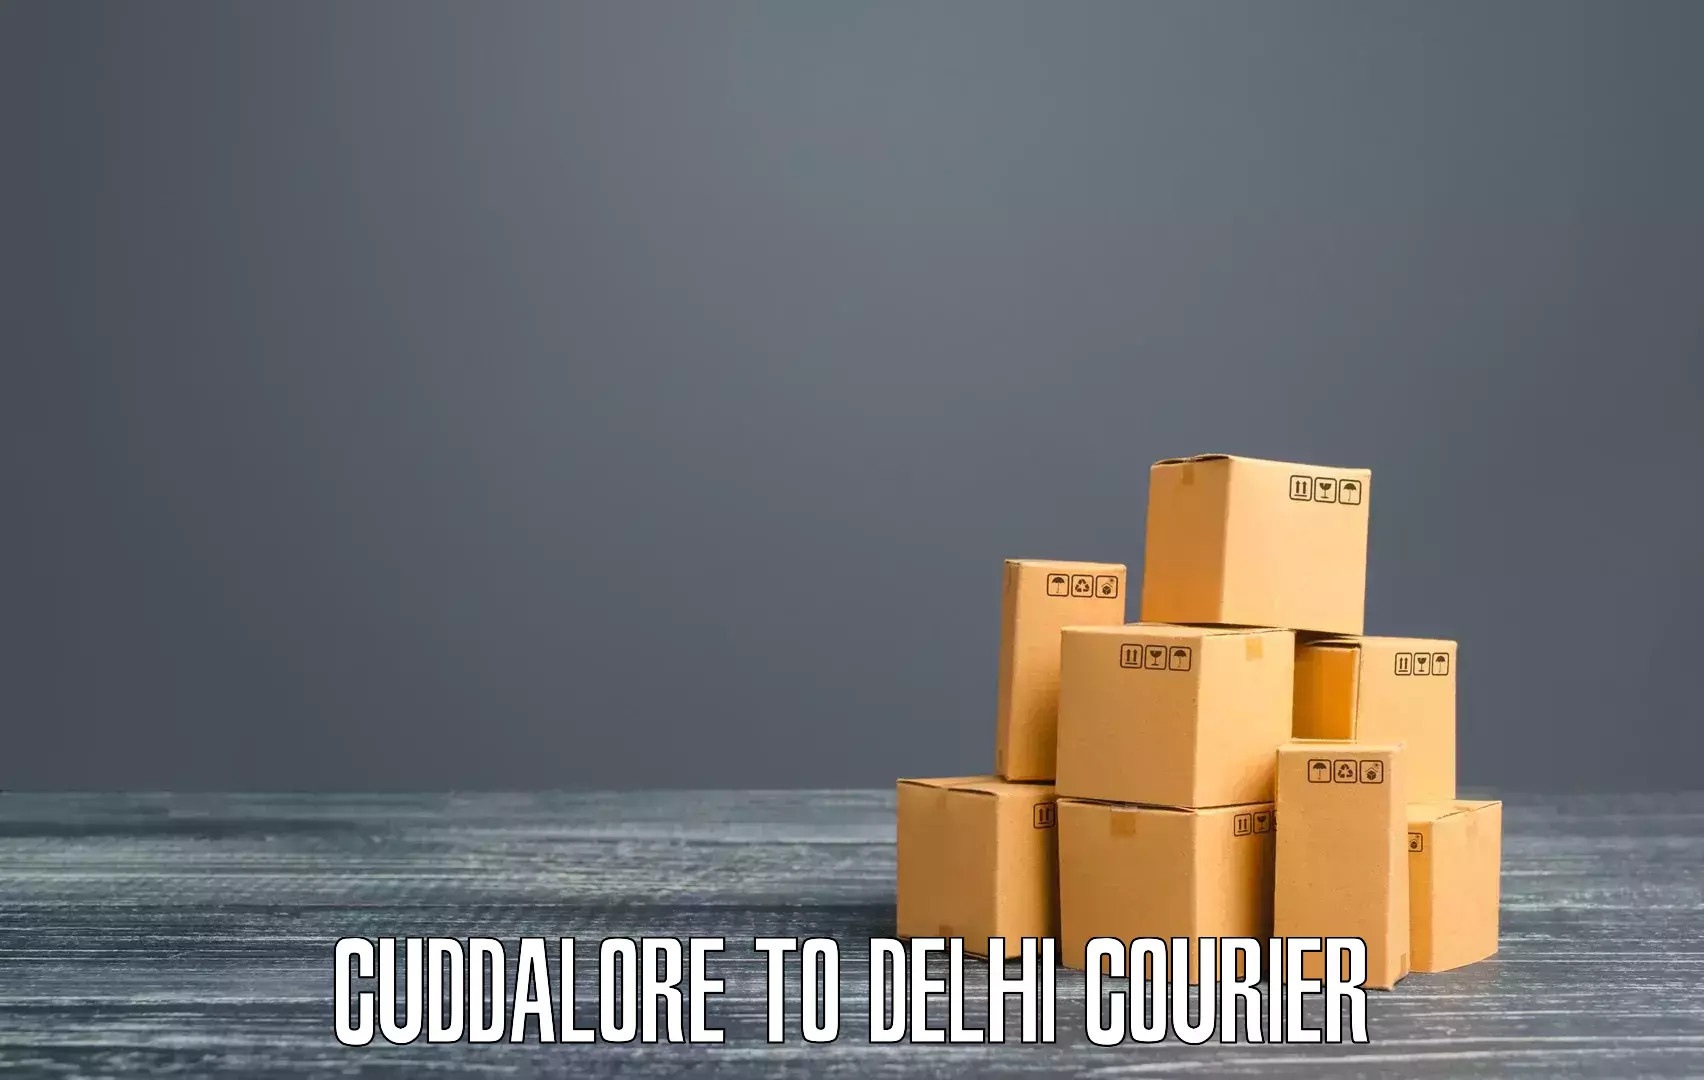 Advanced shipping services Cuddalore to Lodhi Road